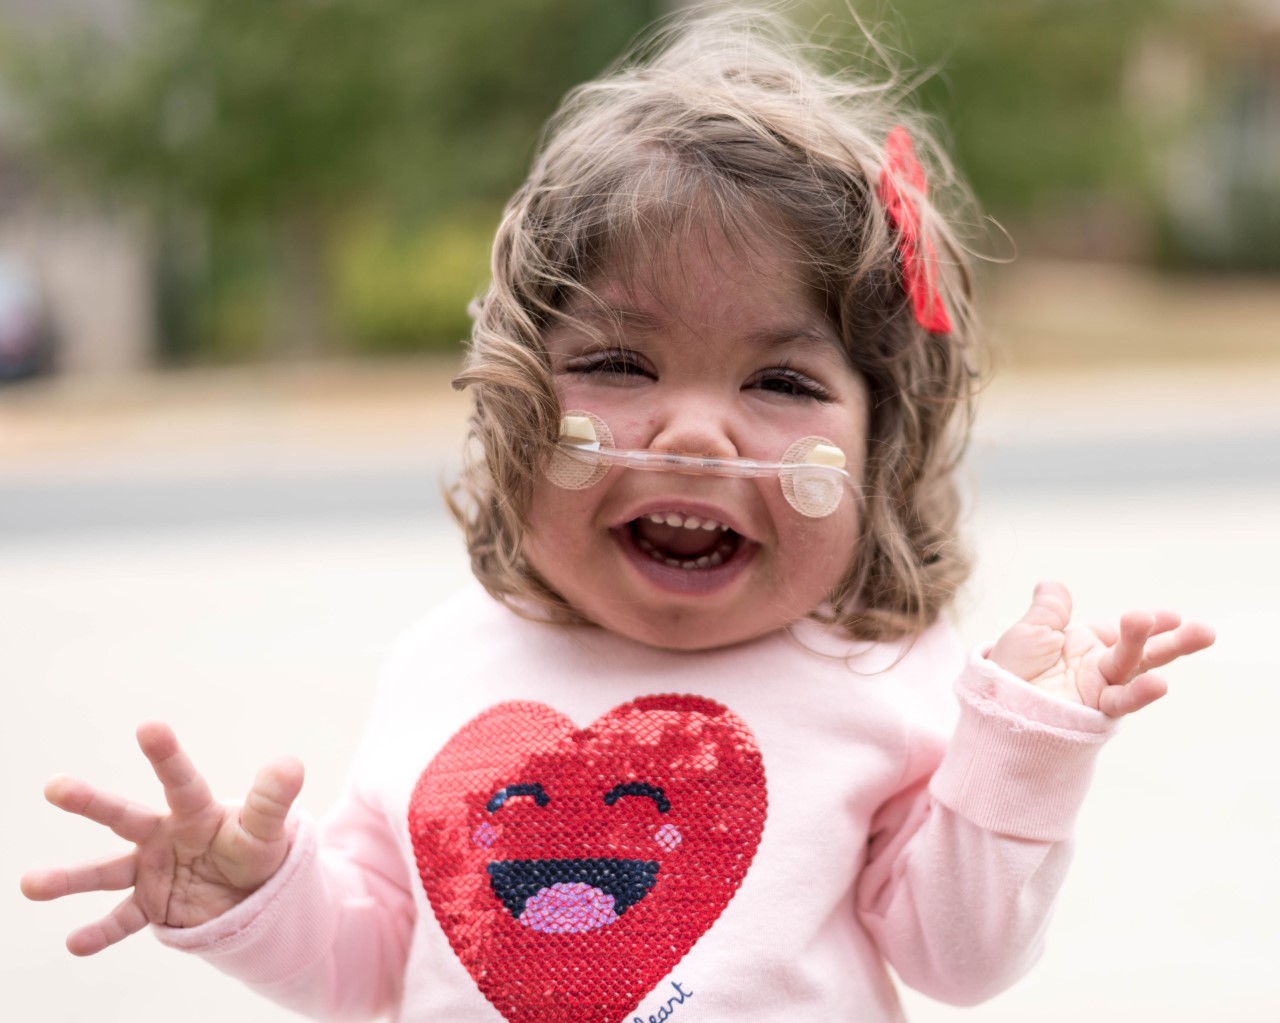 PHOTO: Emmett Hightshoe was diagnosed with Kabuki syndrome in utero. It’s a rare genetic disorder impacting organ development, as well as her physical and cognitive abilities.